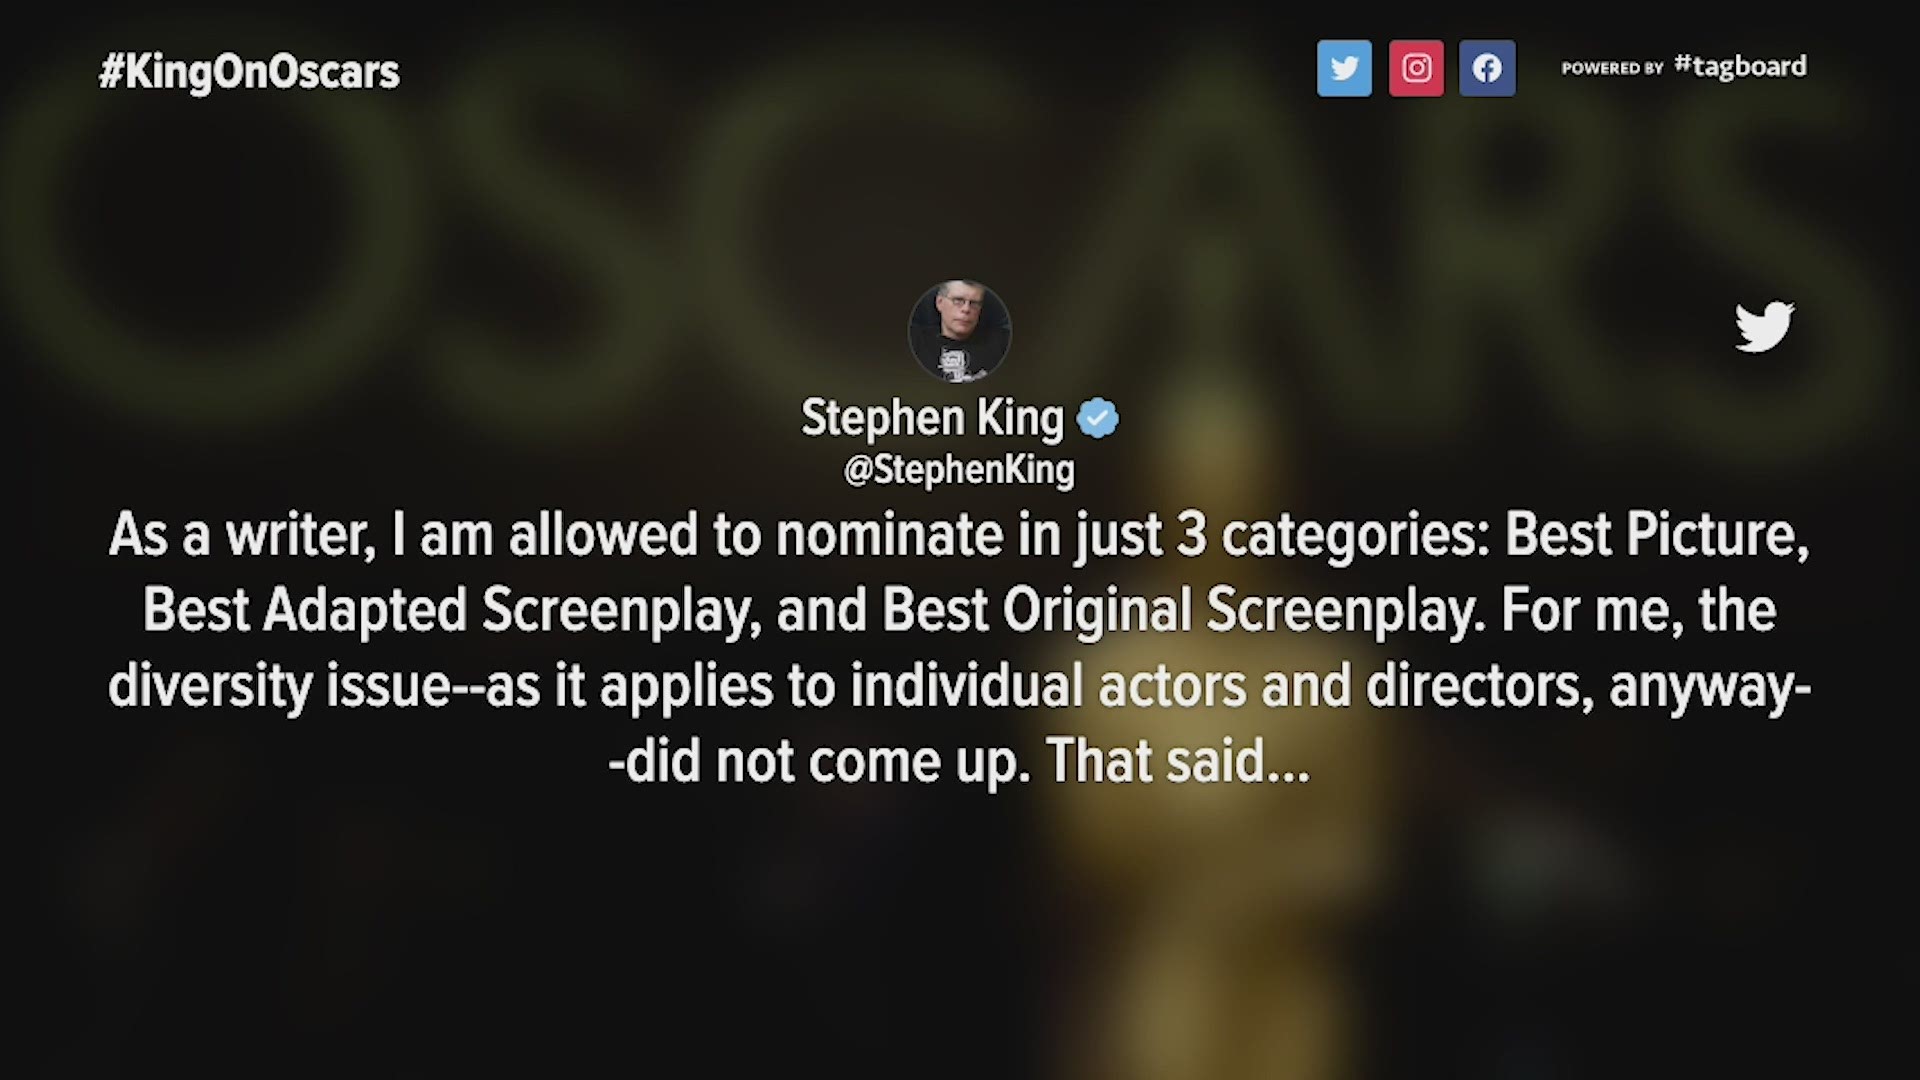 The entertainment community took to Twitter discussing the lack of diversity in Oscar nominations. Horror author Stephen King had a unique take on Twitter Tuesday